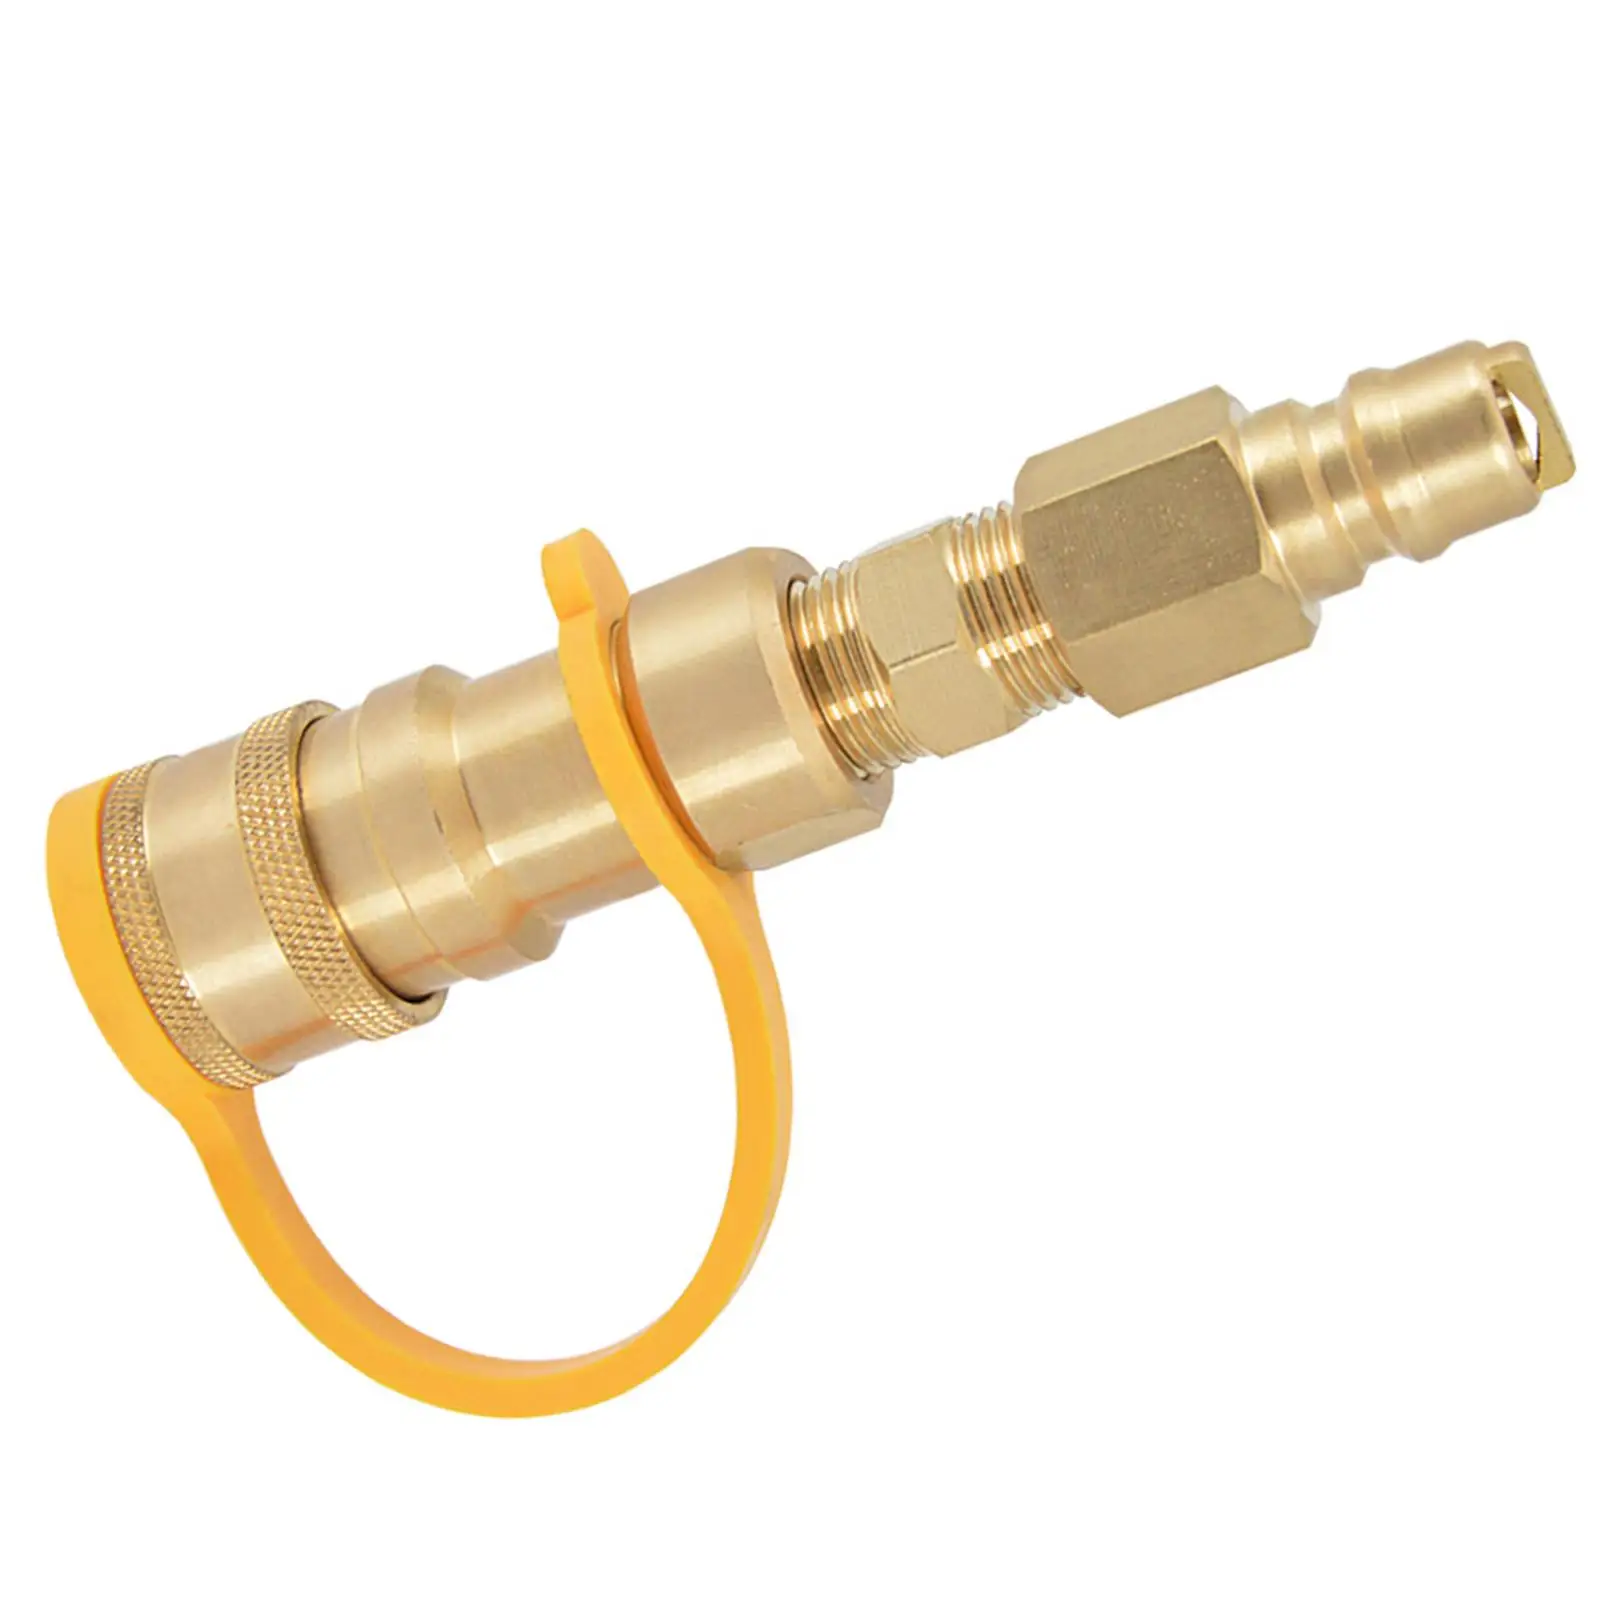 Propane Quick Connector Fitting 1/4